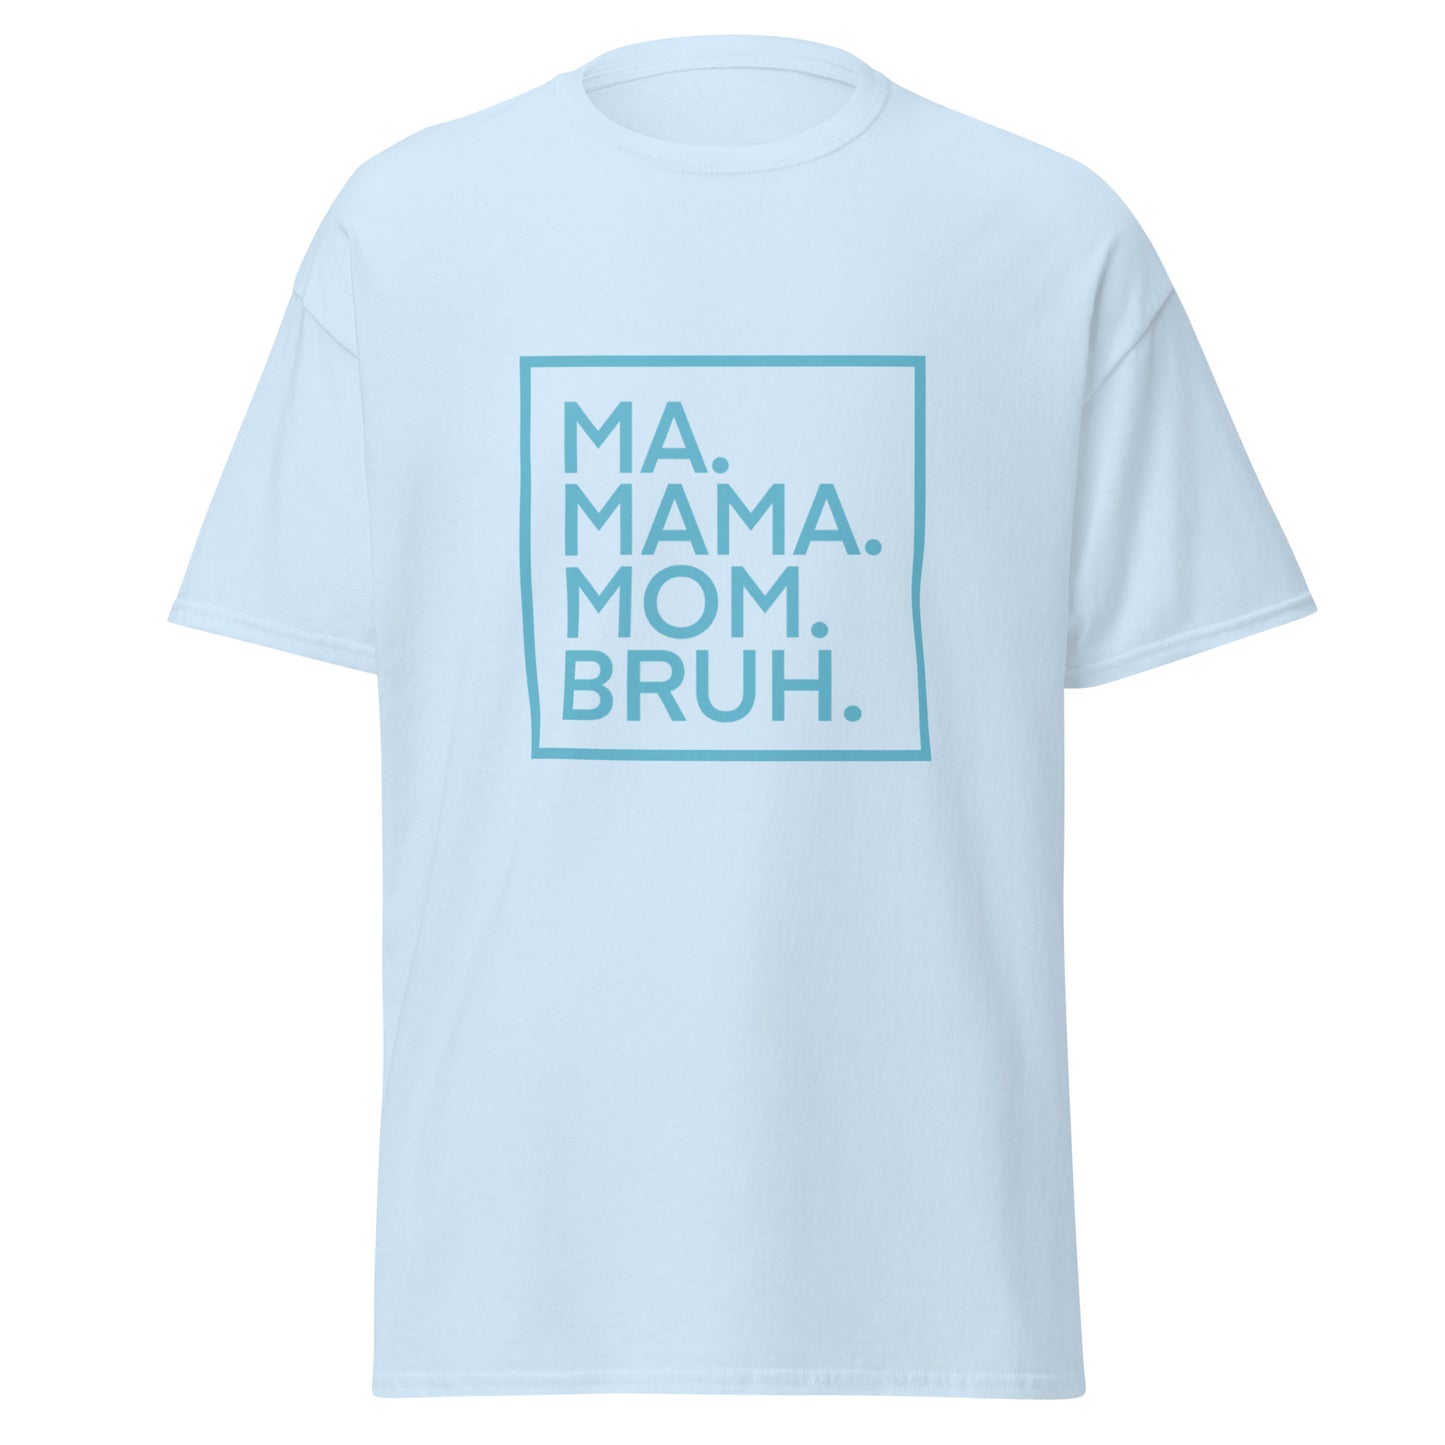 MA to BRUH T-Shirt